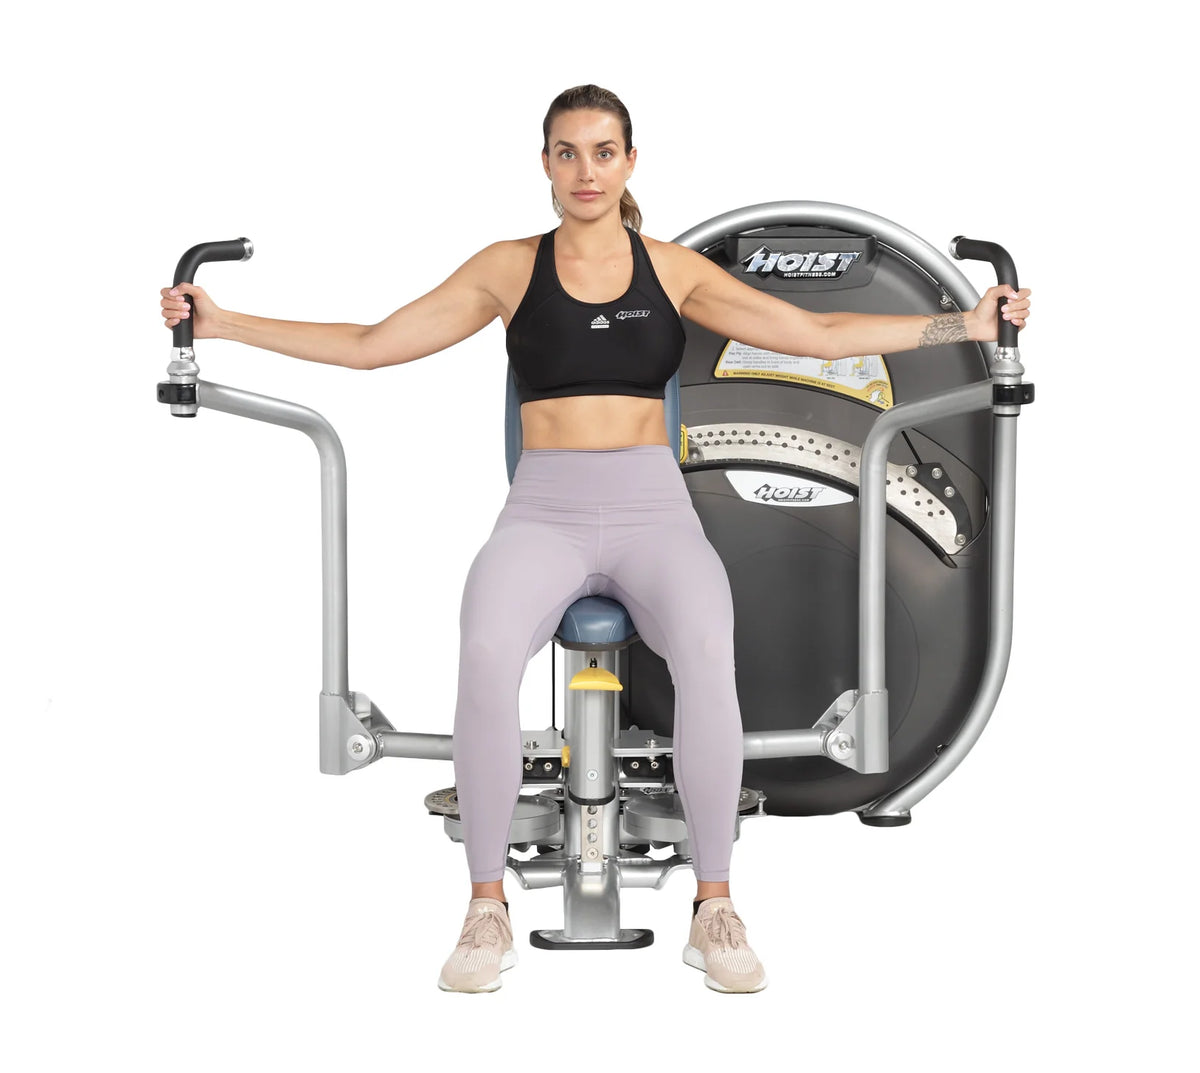 Hoist Fitness CL-3309 Pec Fly-Rear Delt view in use | Fitness Experience